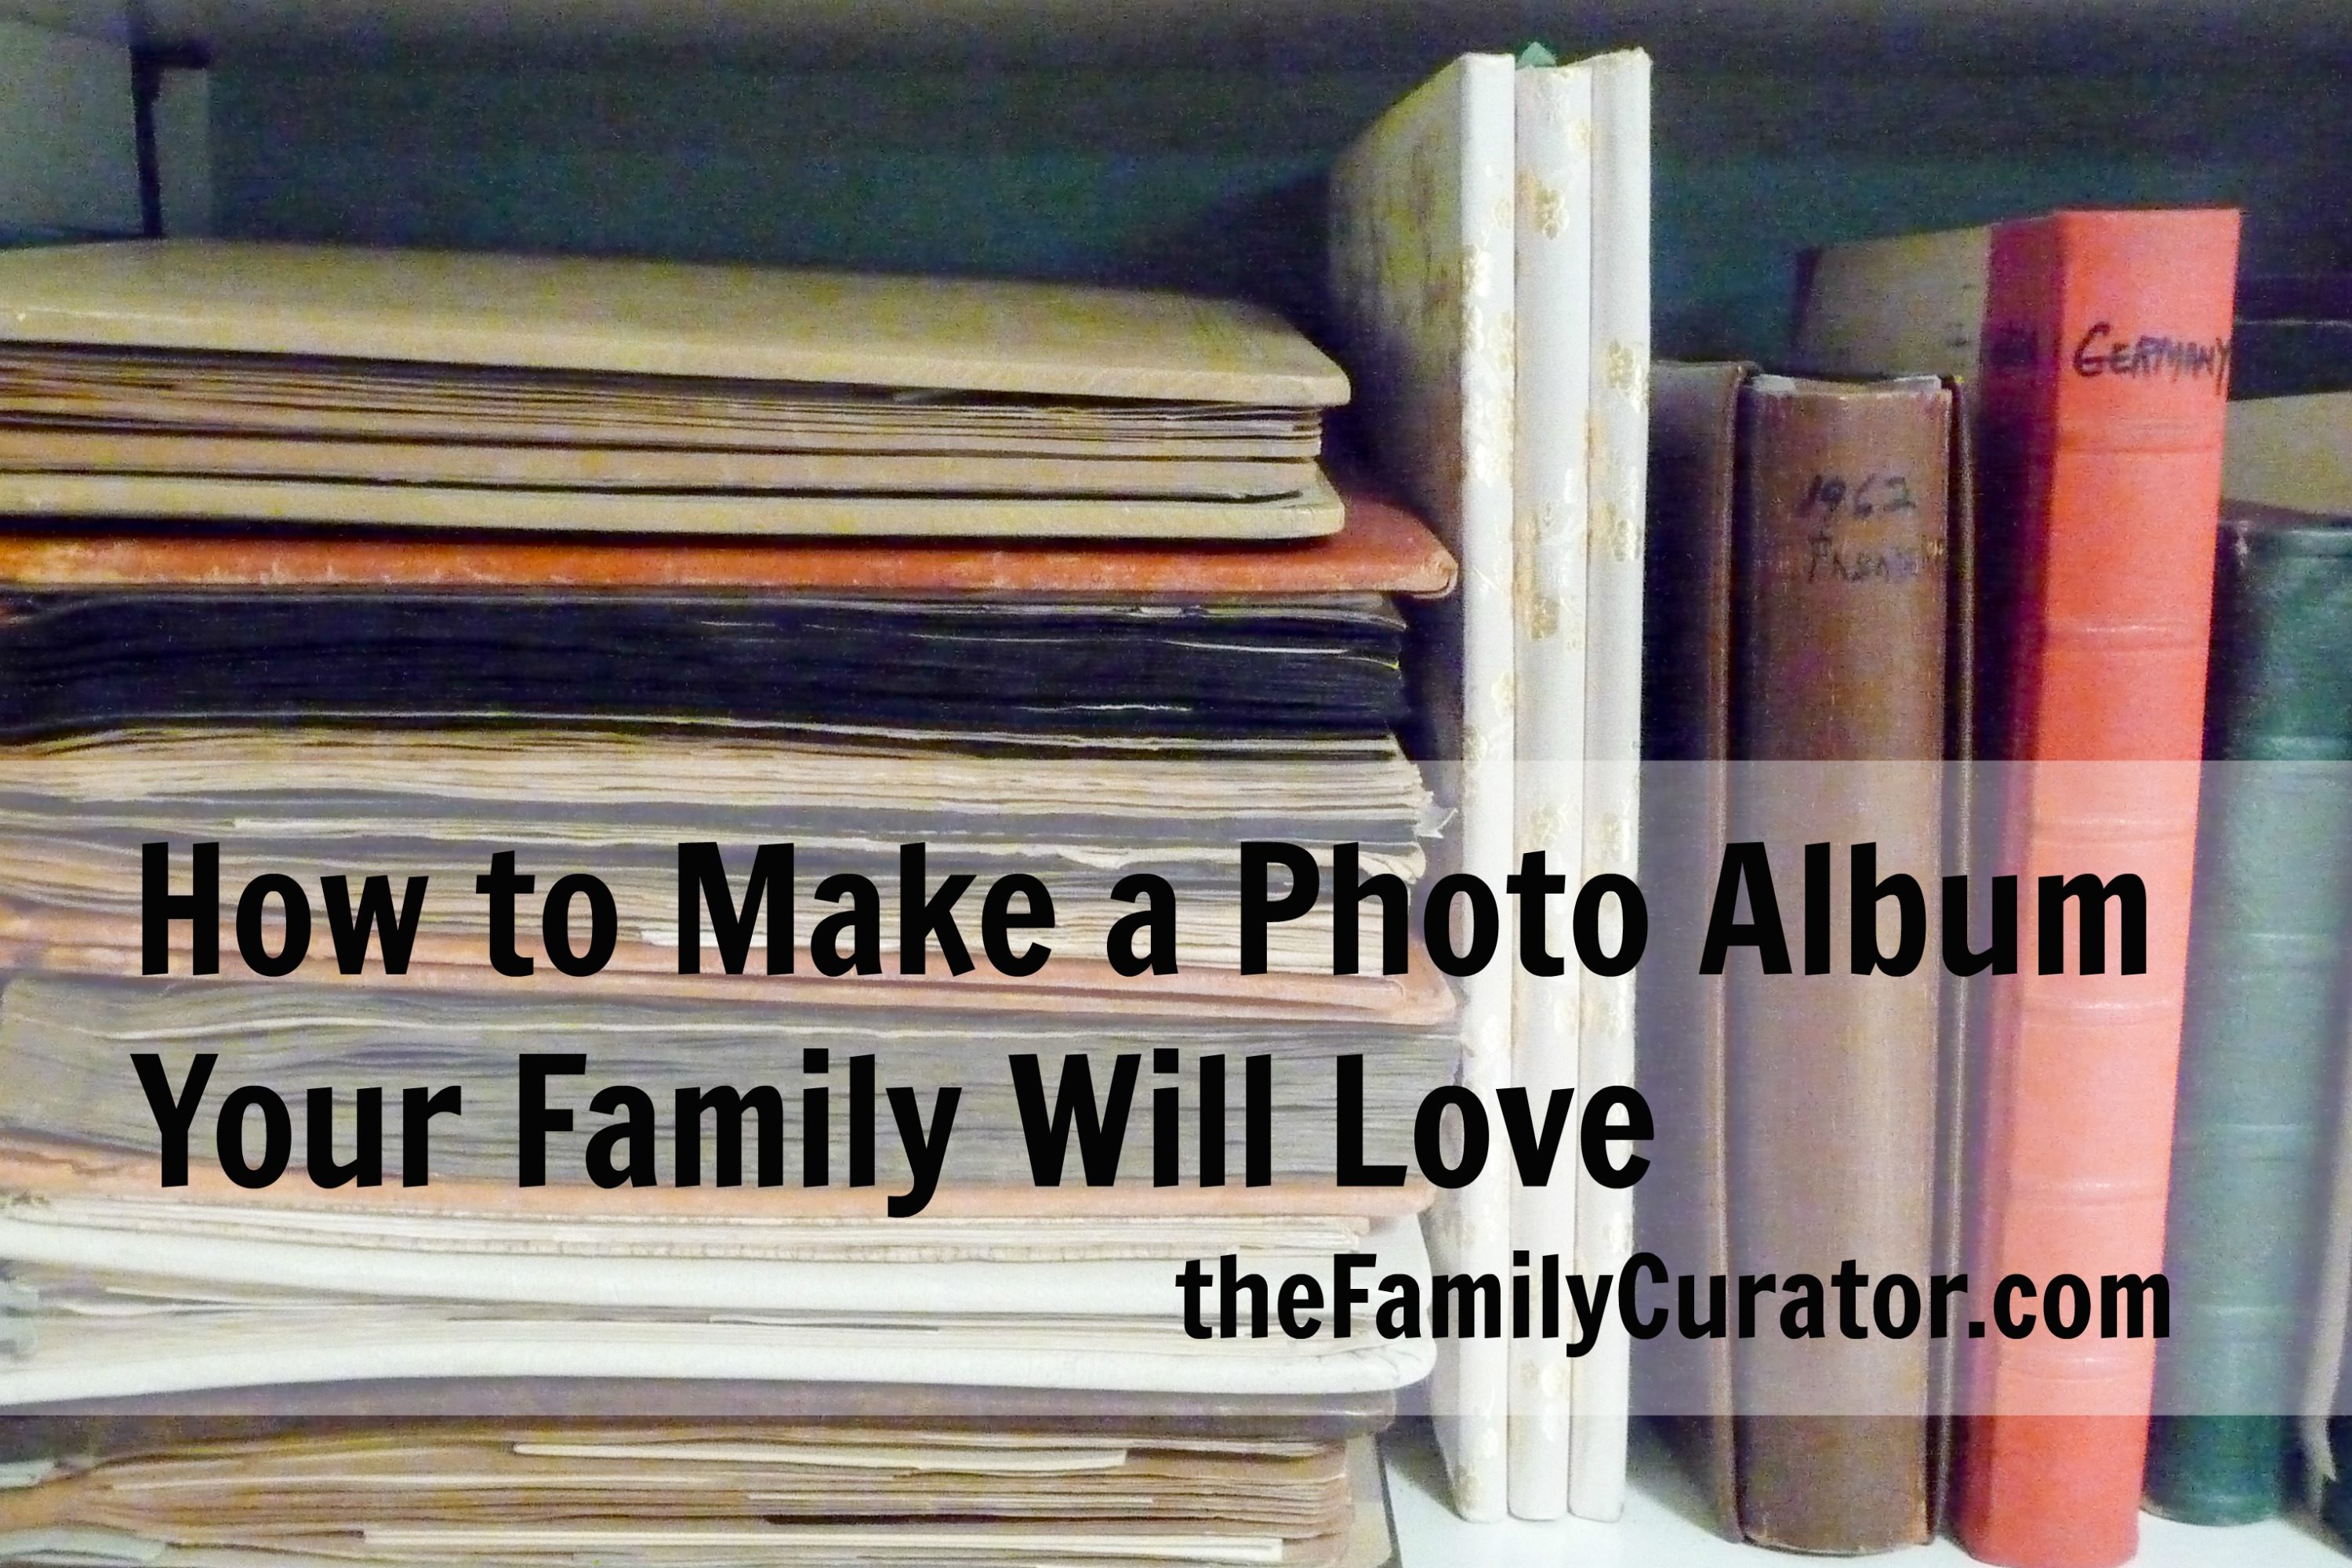 Article How to Make a Photo Album Your Family Will Love